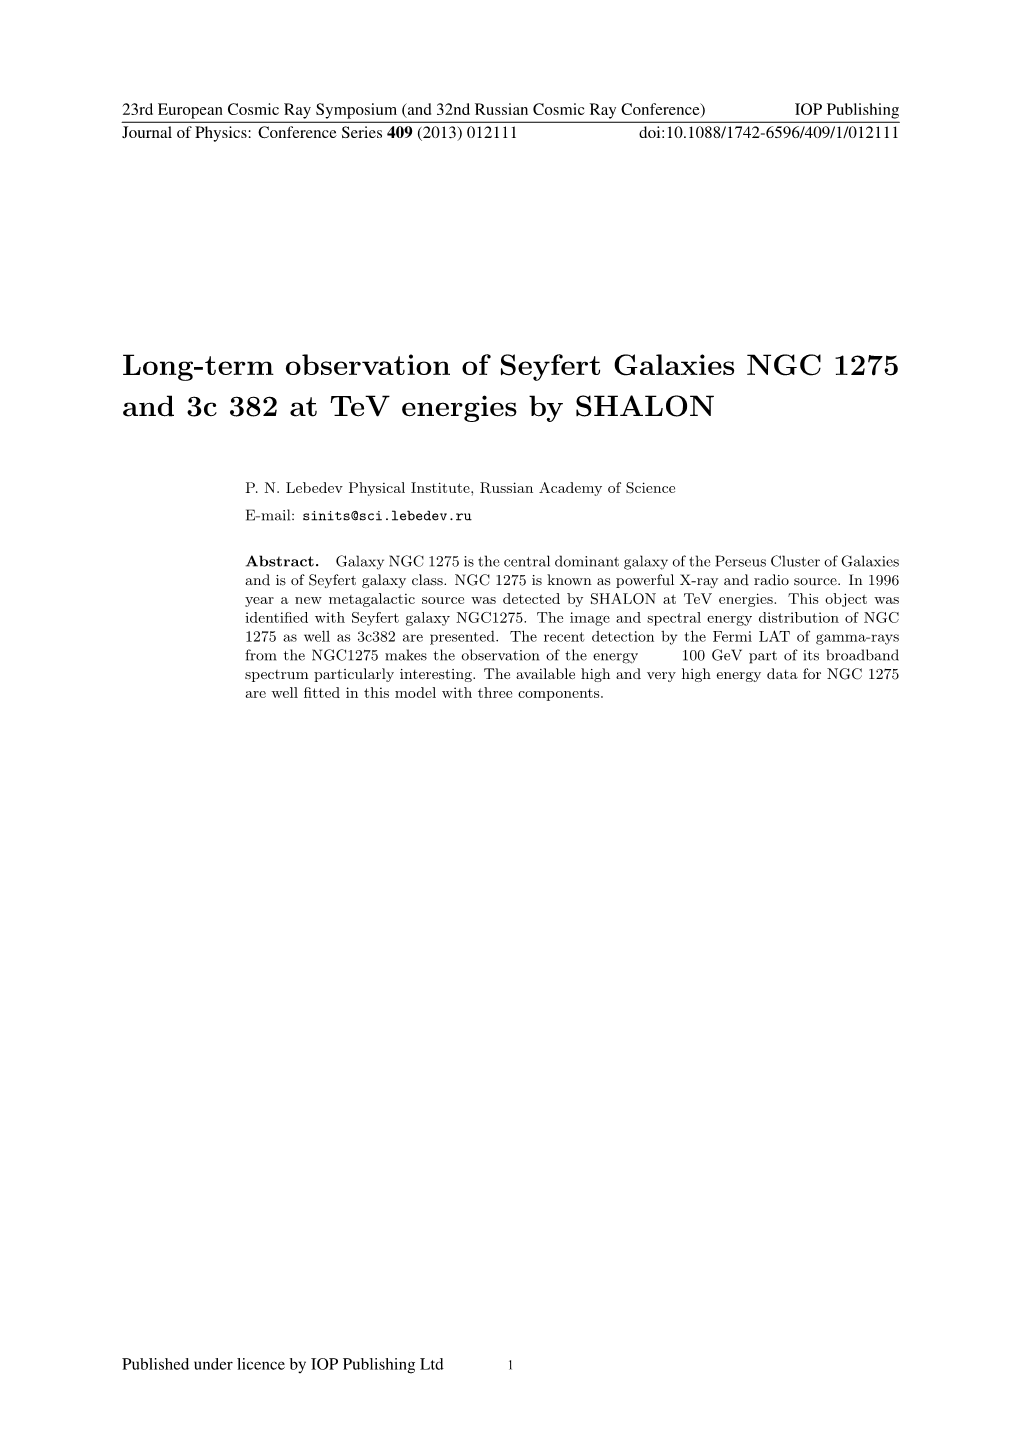 Long-Term Observation of Seyfert Galaxies NGC 1275 and 3C 382 at Tev Energies by SHALON